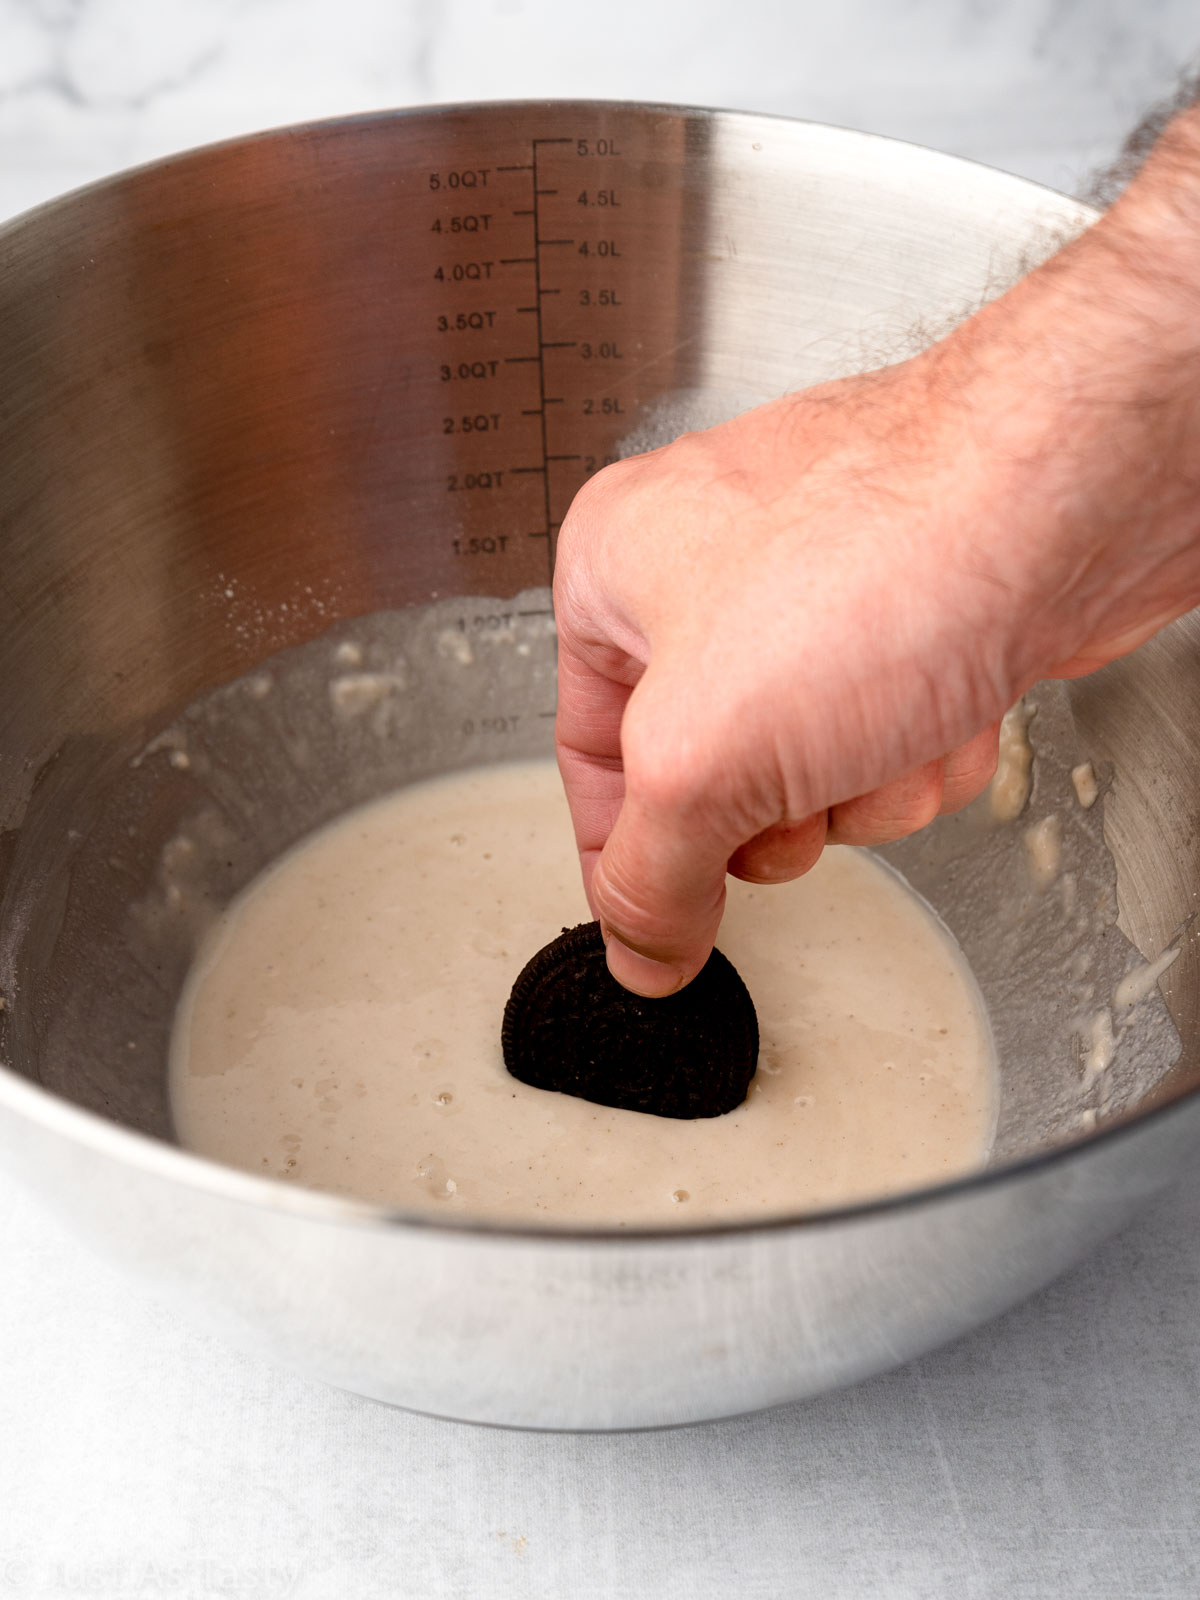 Oreo being dipped into batter.